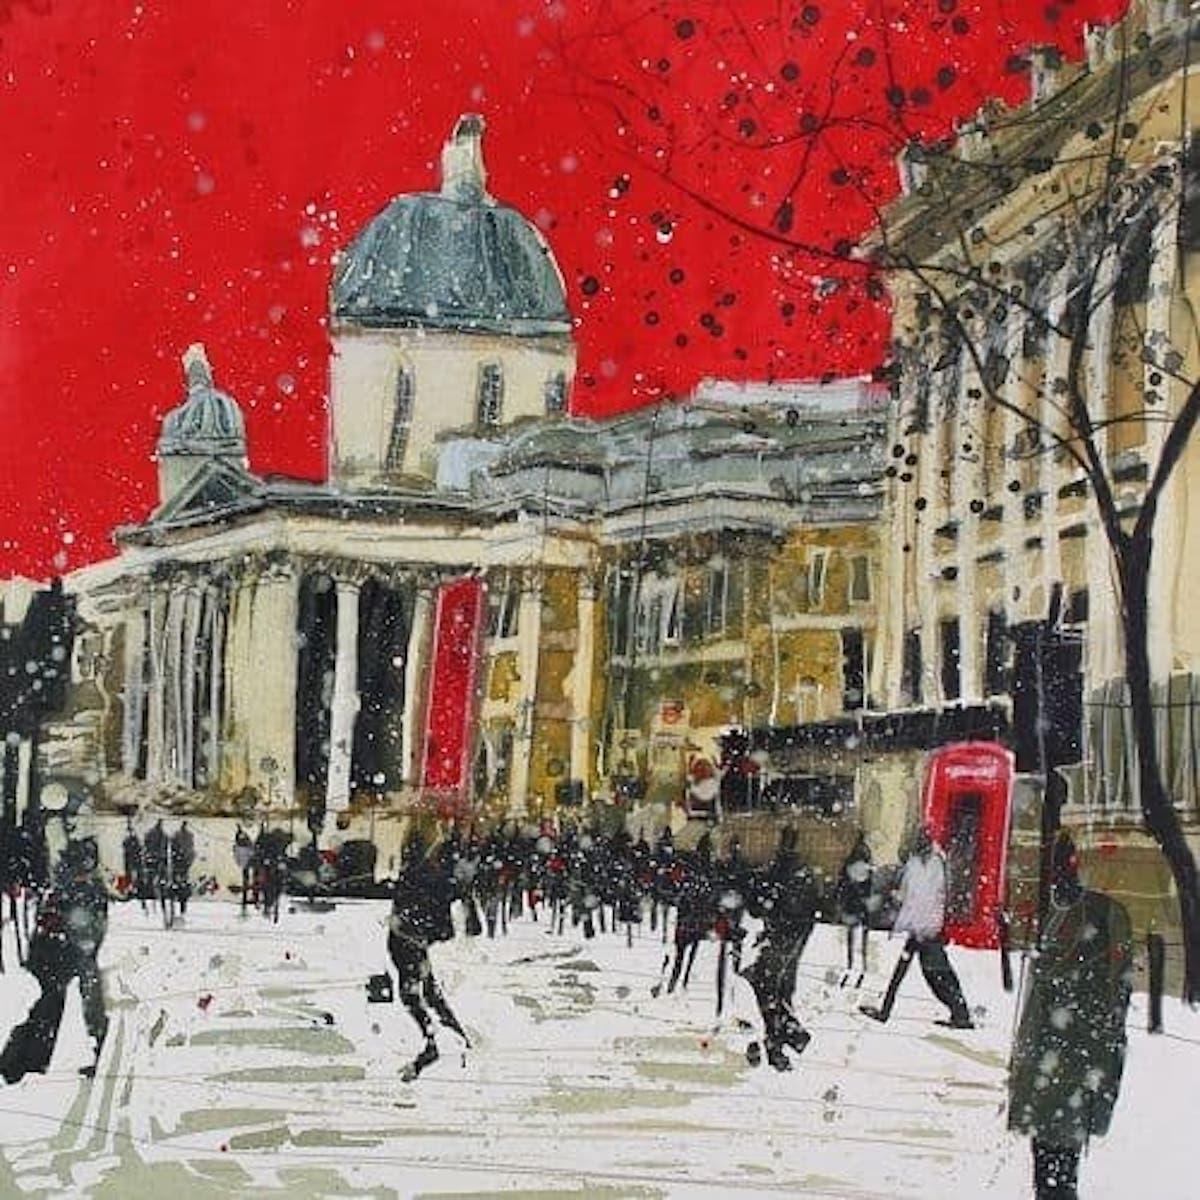 Susan Brown  Landscape Print - Gallery on the Square London by Susan Brown, Limited Edition Print, Architecture